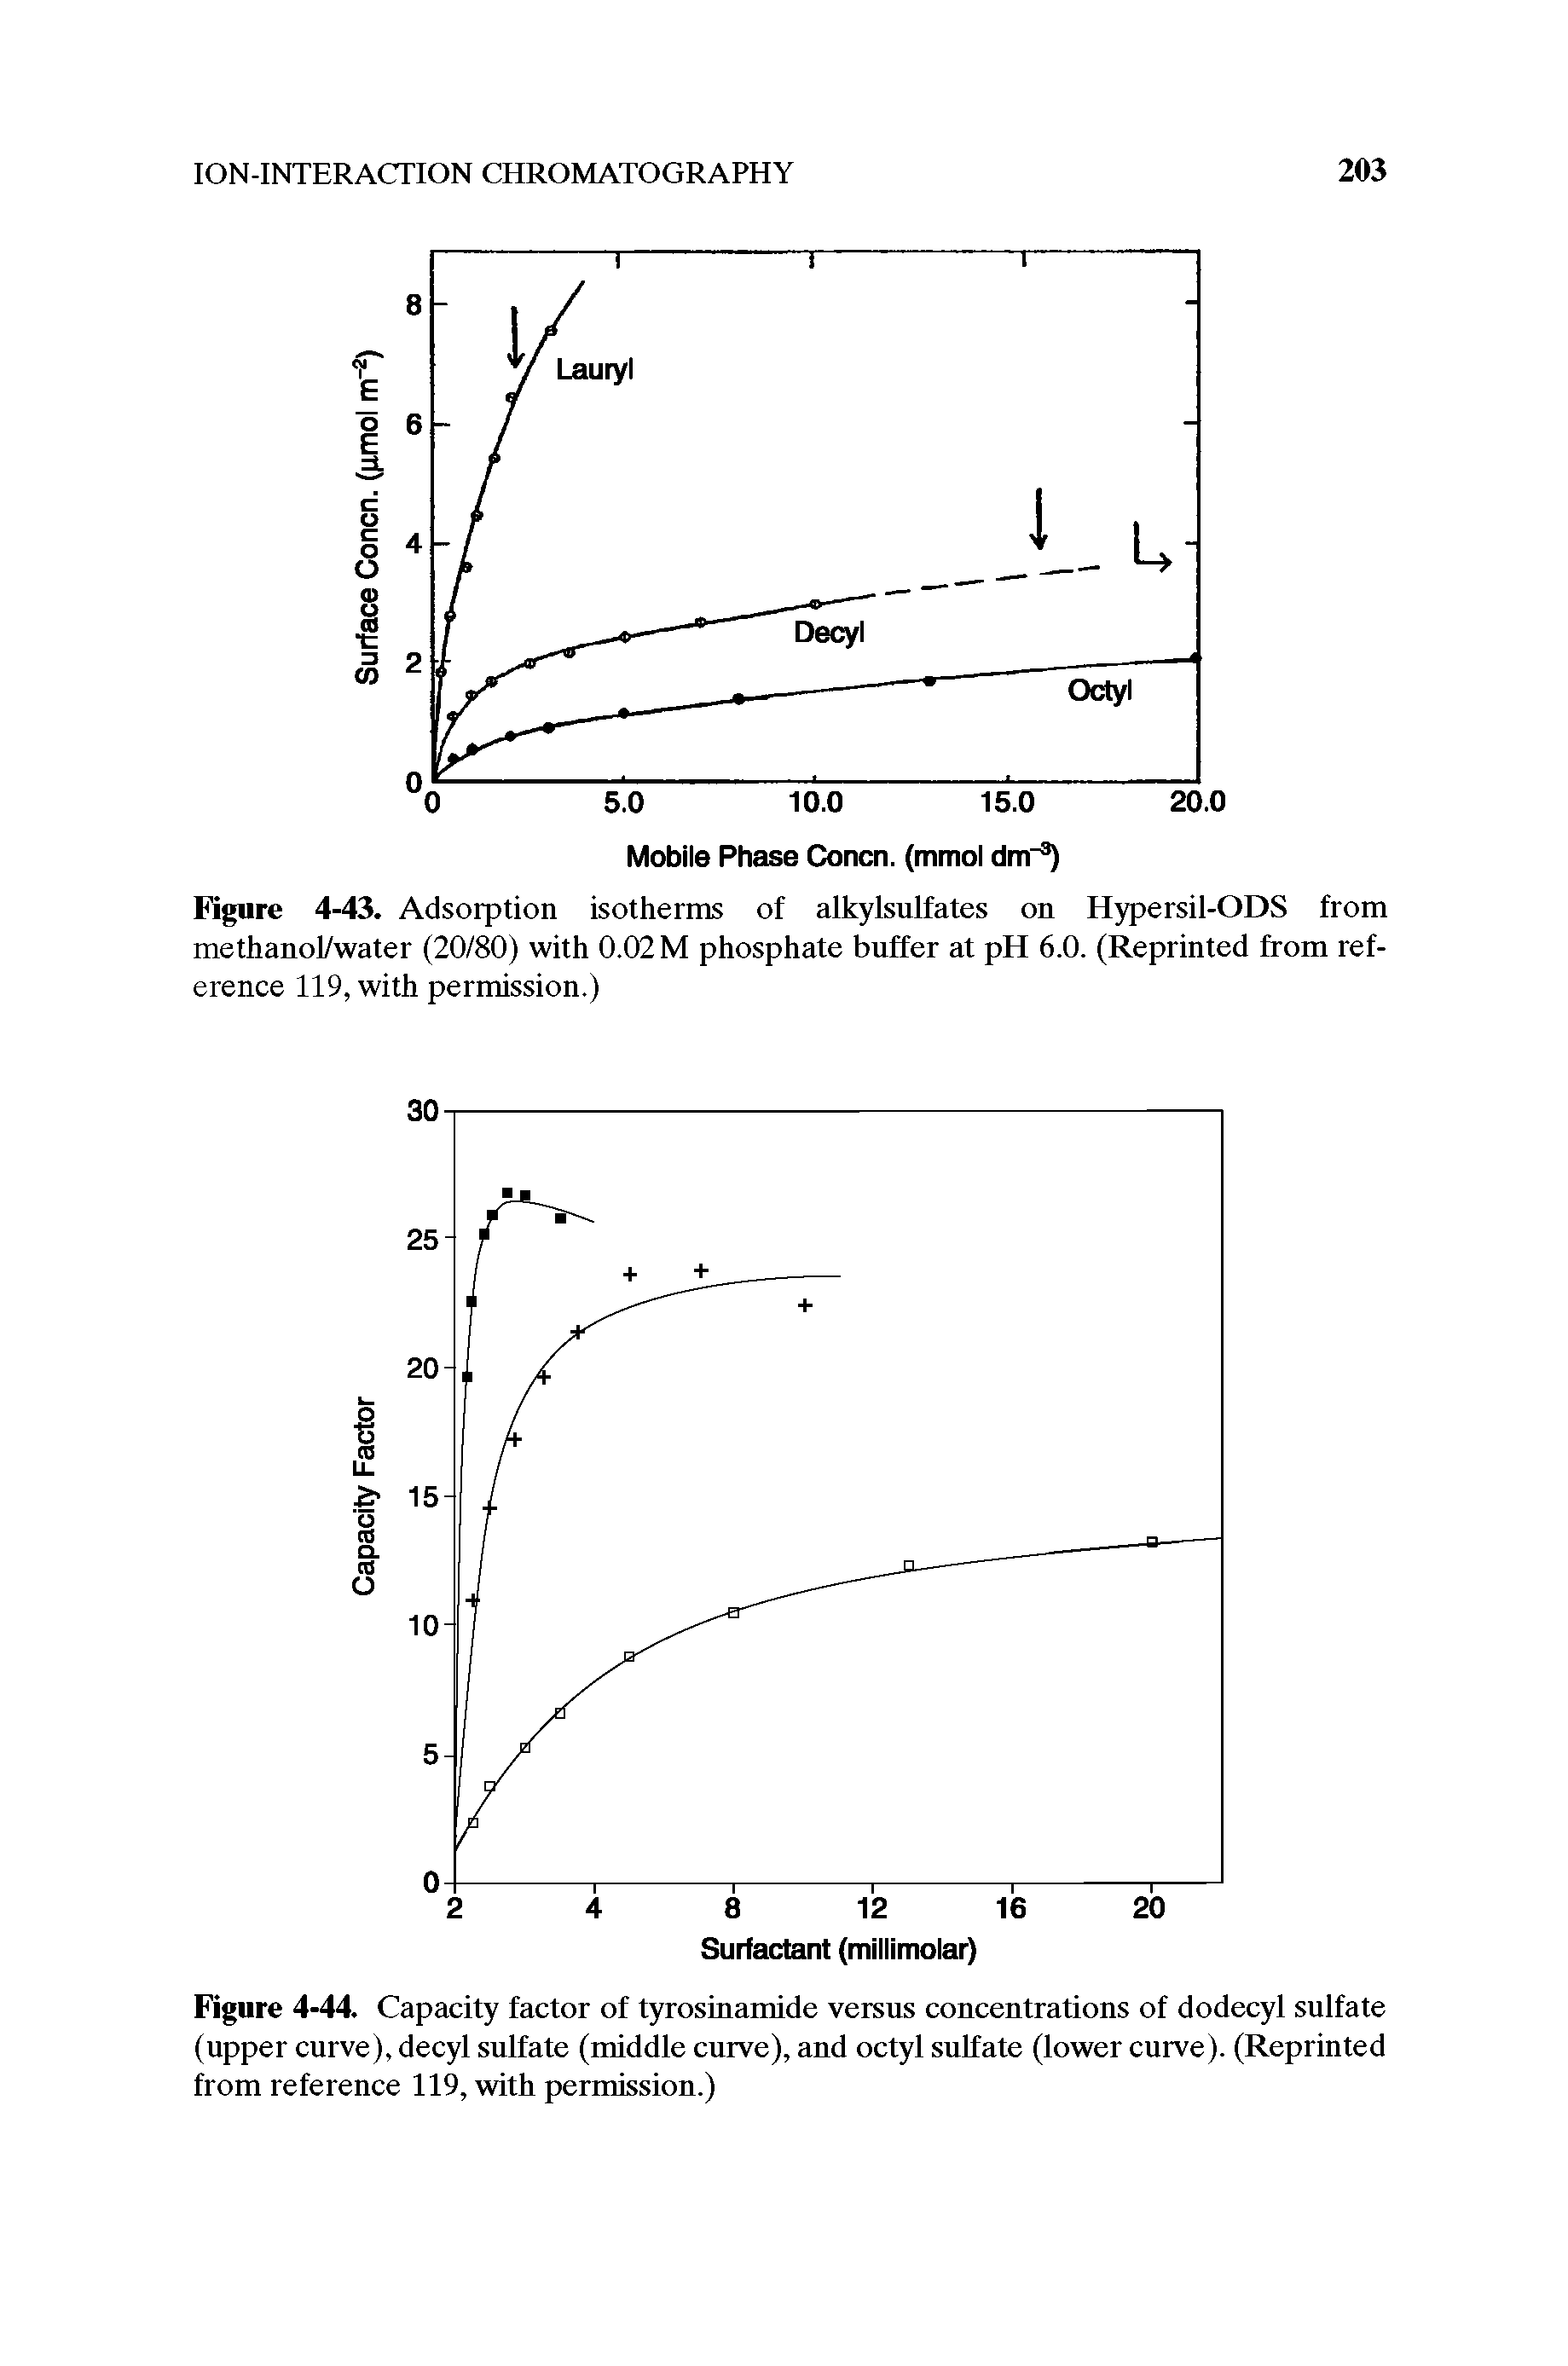 Figure 4-44. Capacity factor of tyrosinamide versus concentrations of dodecyl sulfate (upper curve), decyl sulfate (middle curve), and octyl sulfate (lower curve). (Reprinted from reference 119, with permission.)...